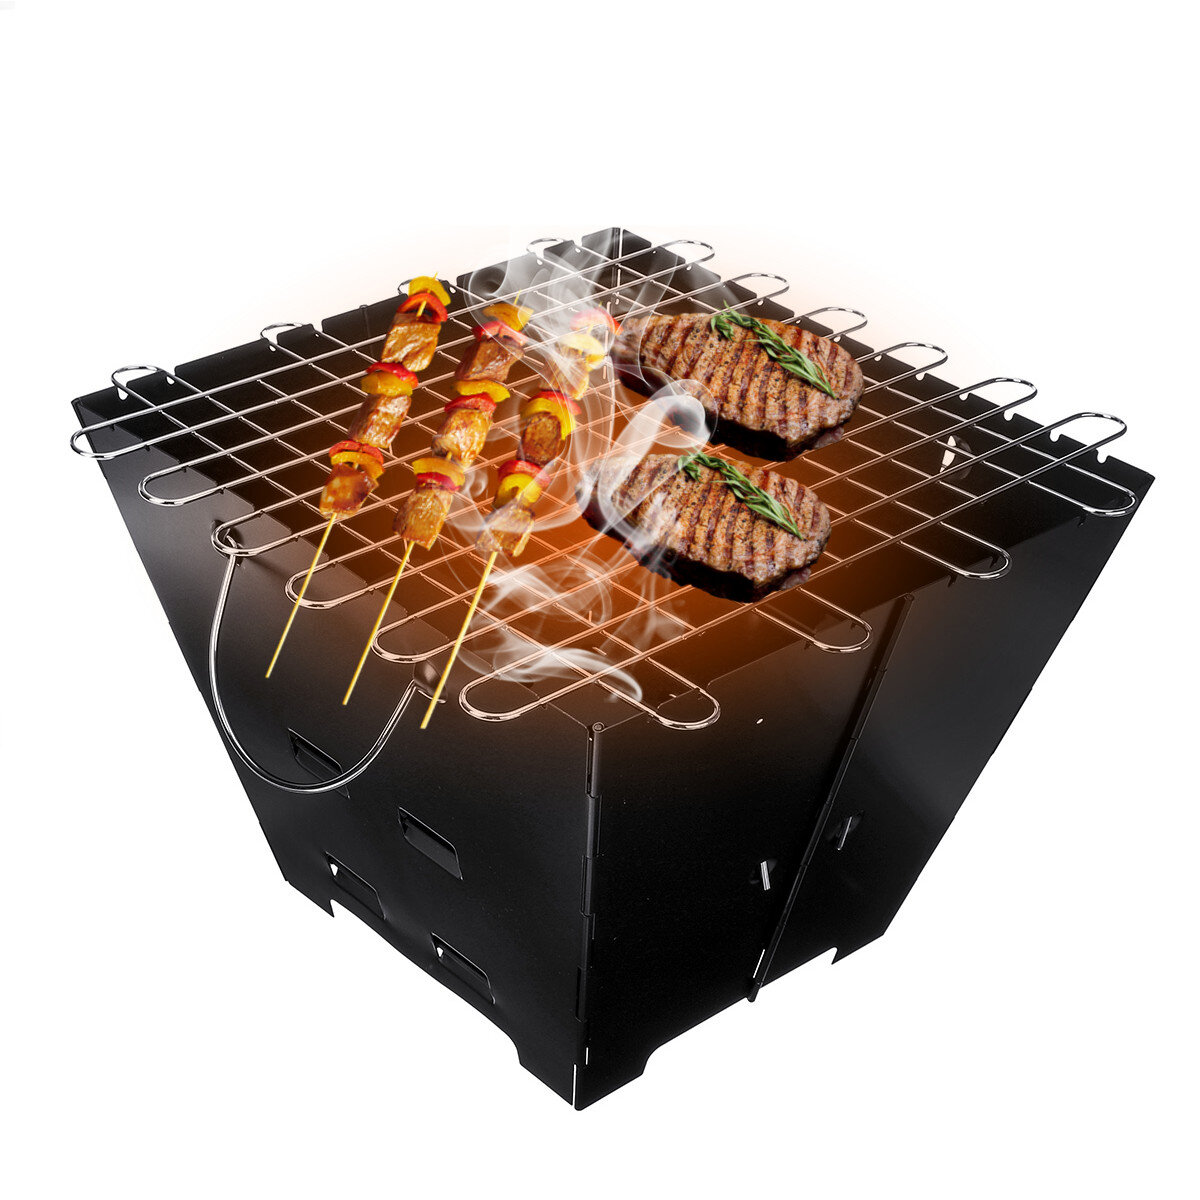 Outdoor BBQ Grill Folding Charcoal Furnace Camping Picnic Oven Stainless Steel Cooking Stove